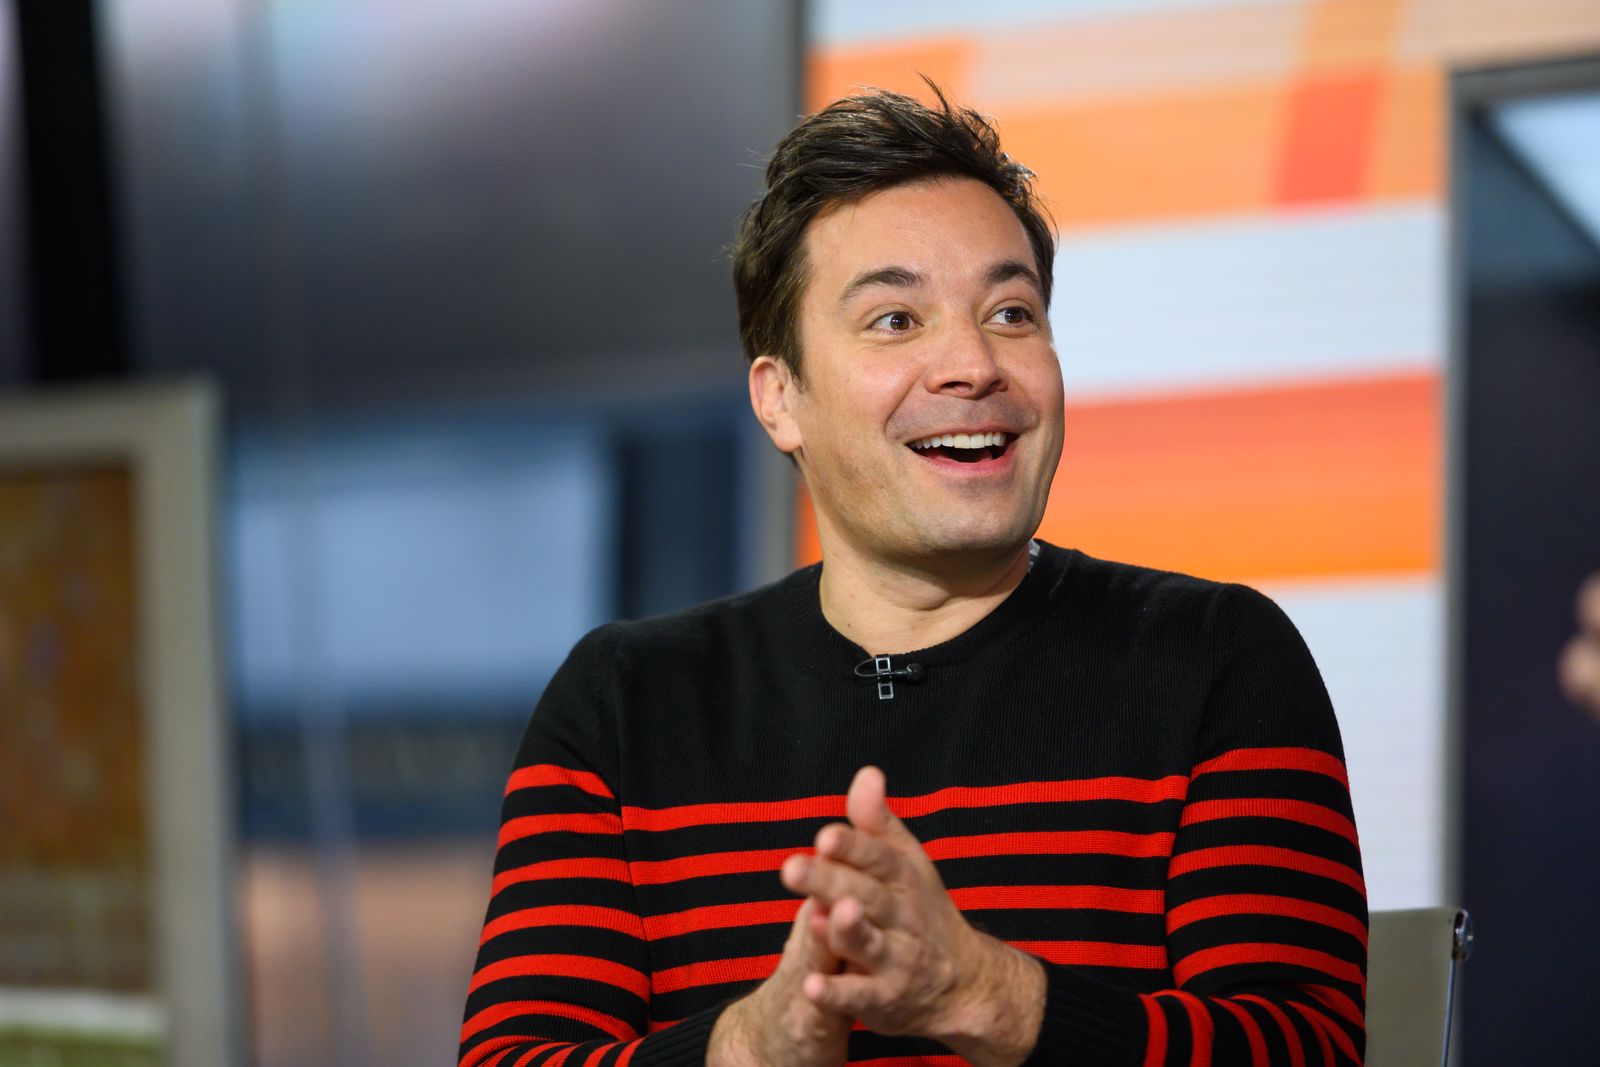 Jimmy Fallon at "The Tonight Show" studio on January 28, 2020 | Photo: Getty Images